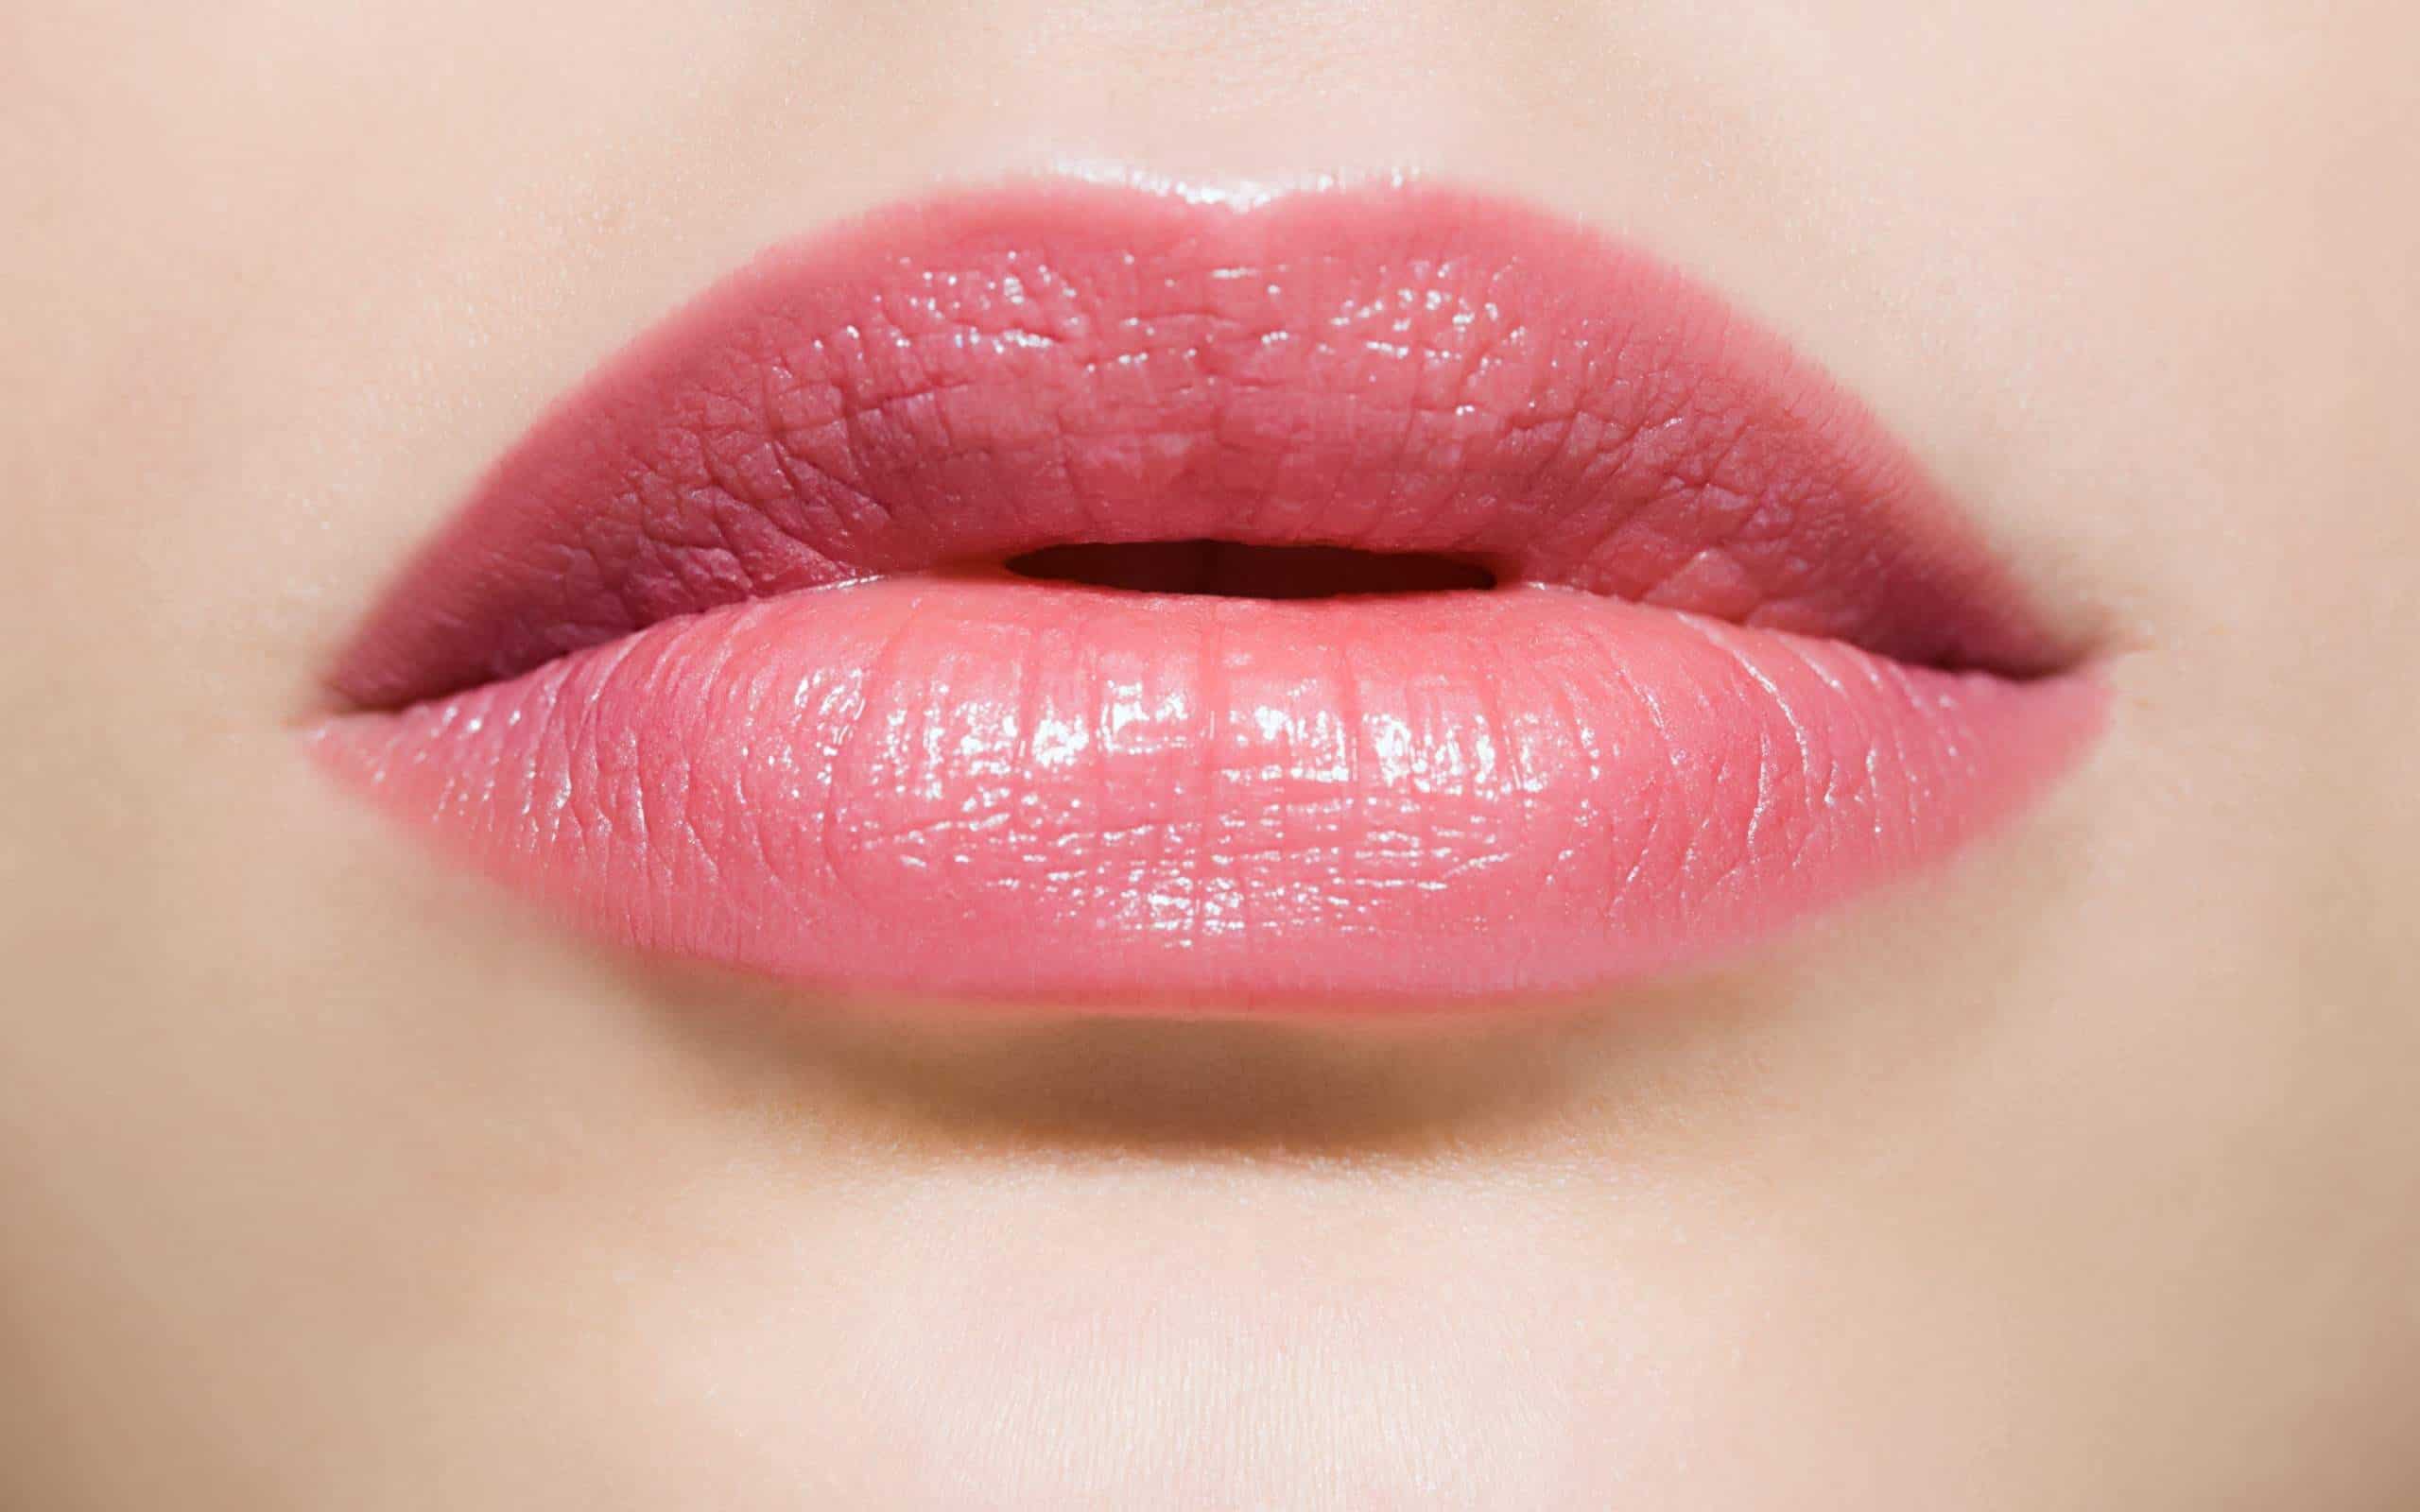 Tremendous home remedy to make lips completely pink